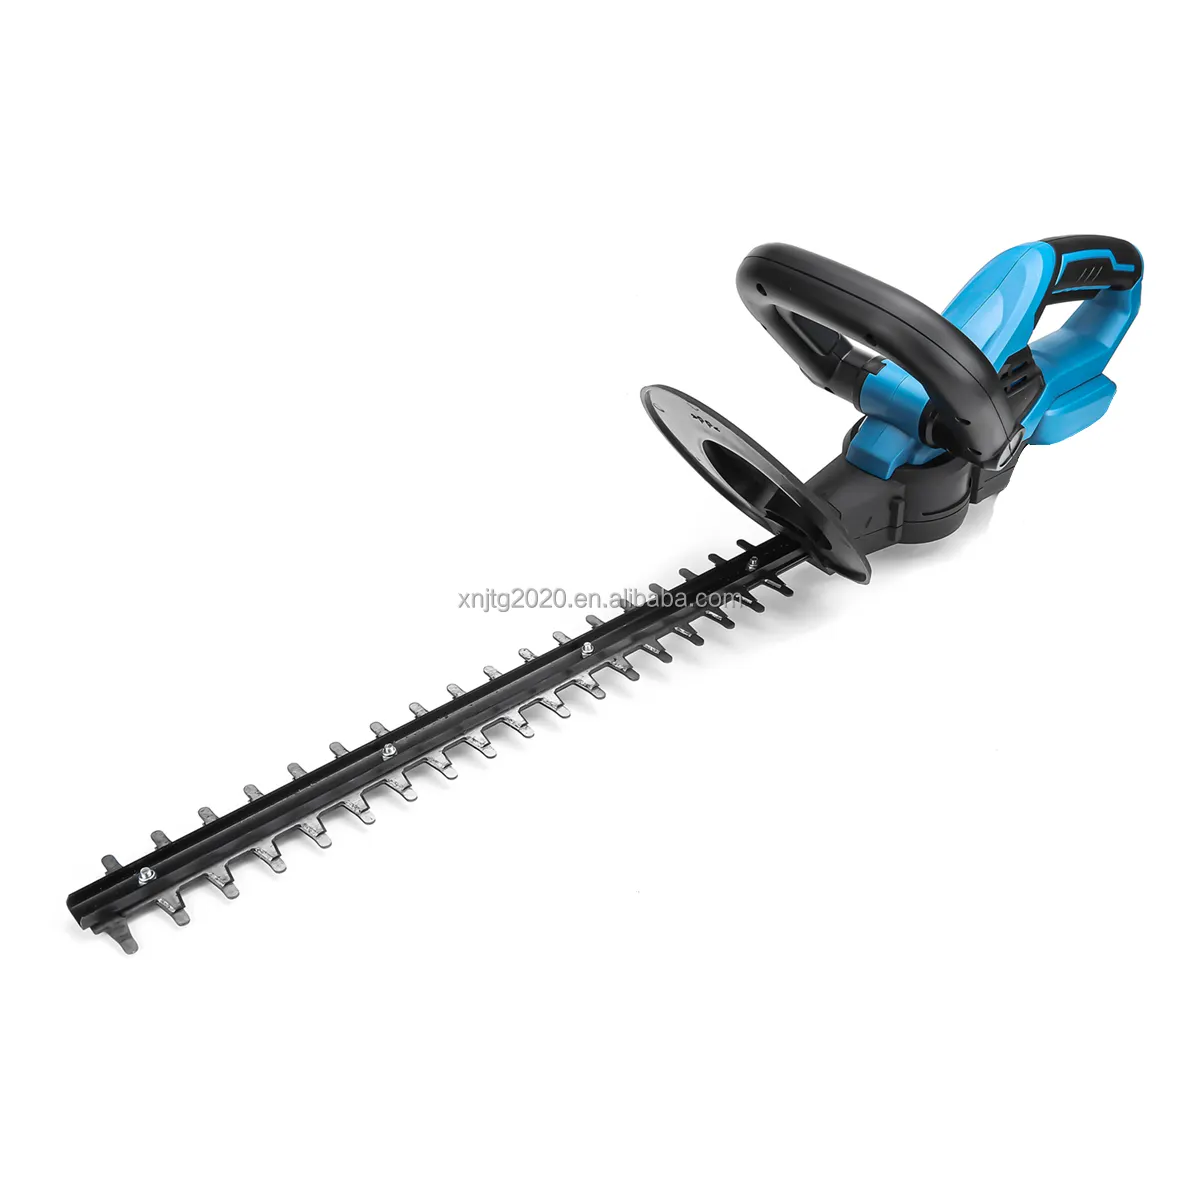 20 Inch Bush Lawn Garden Cutter Electric Garden Power Tool Fit For Makita Battery Hedge Trimmer